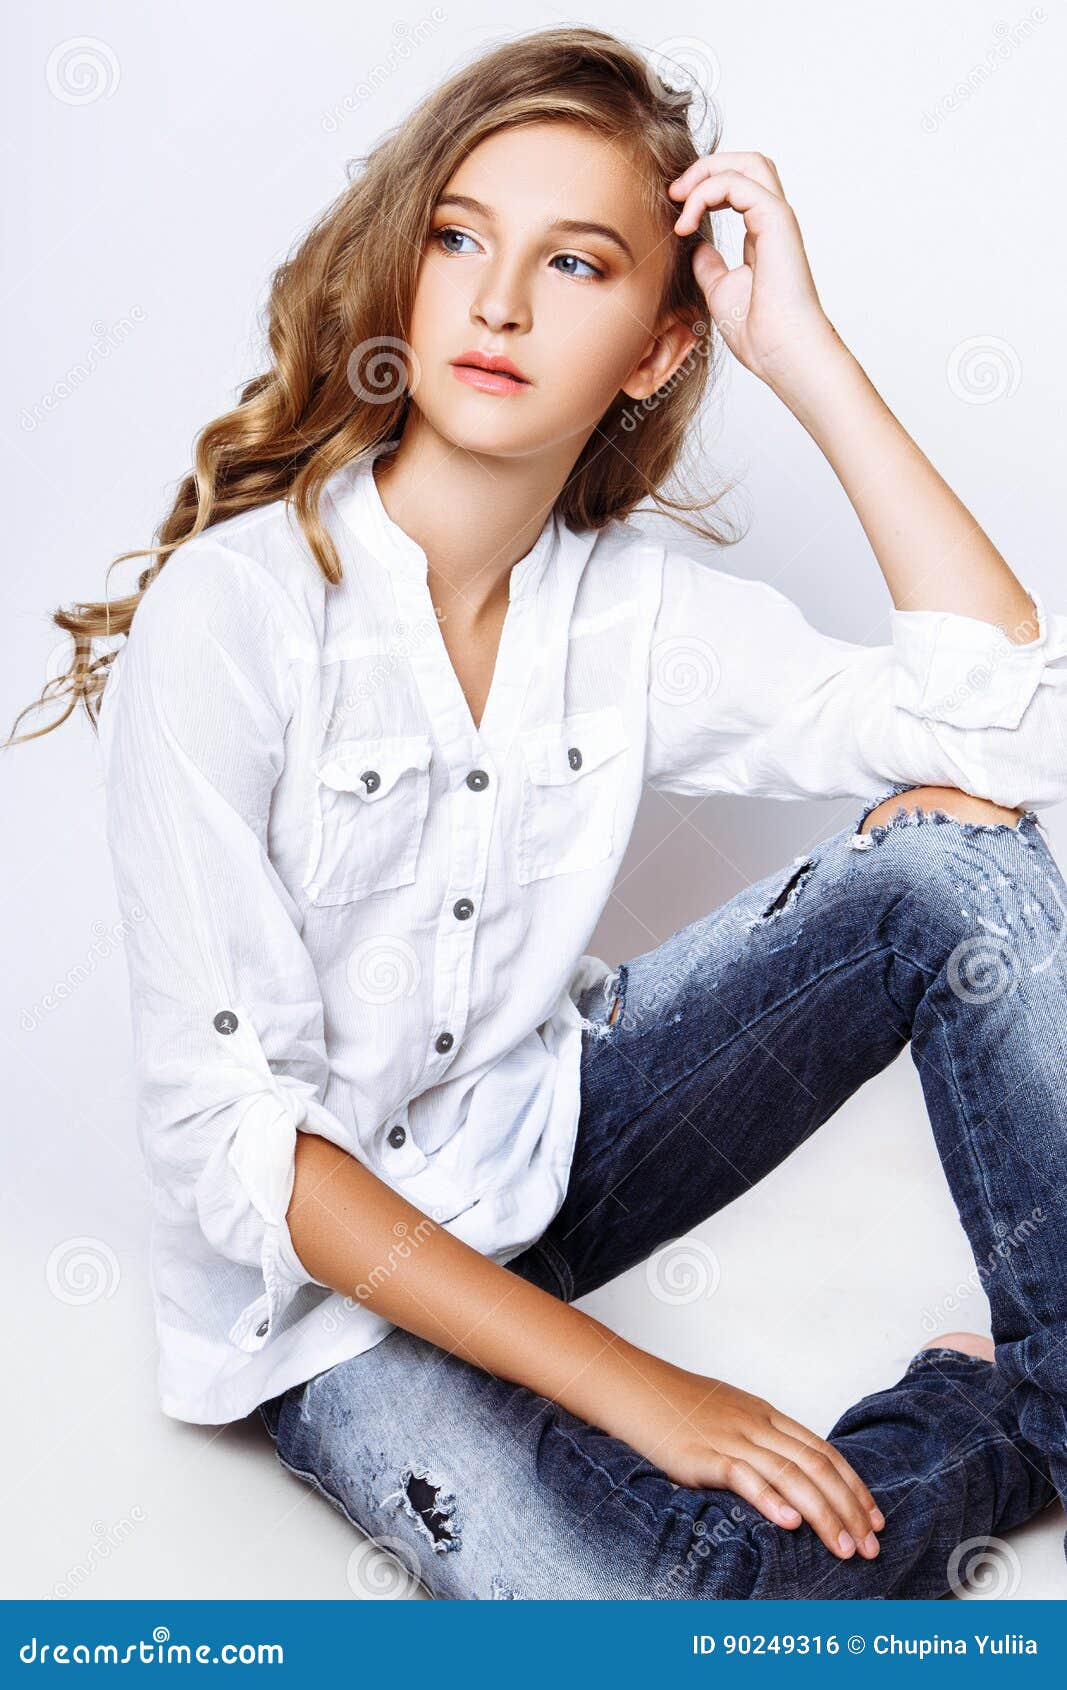 Blond-haired 13-years Old Girl In Studio Stock Photo ...